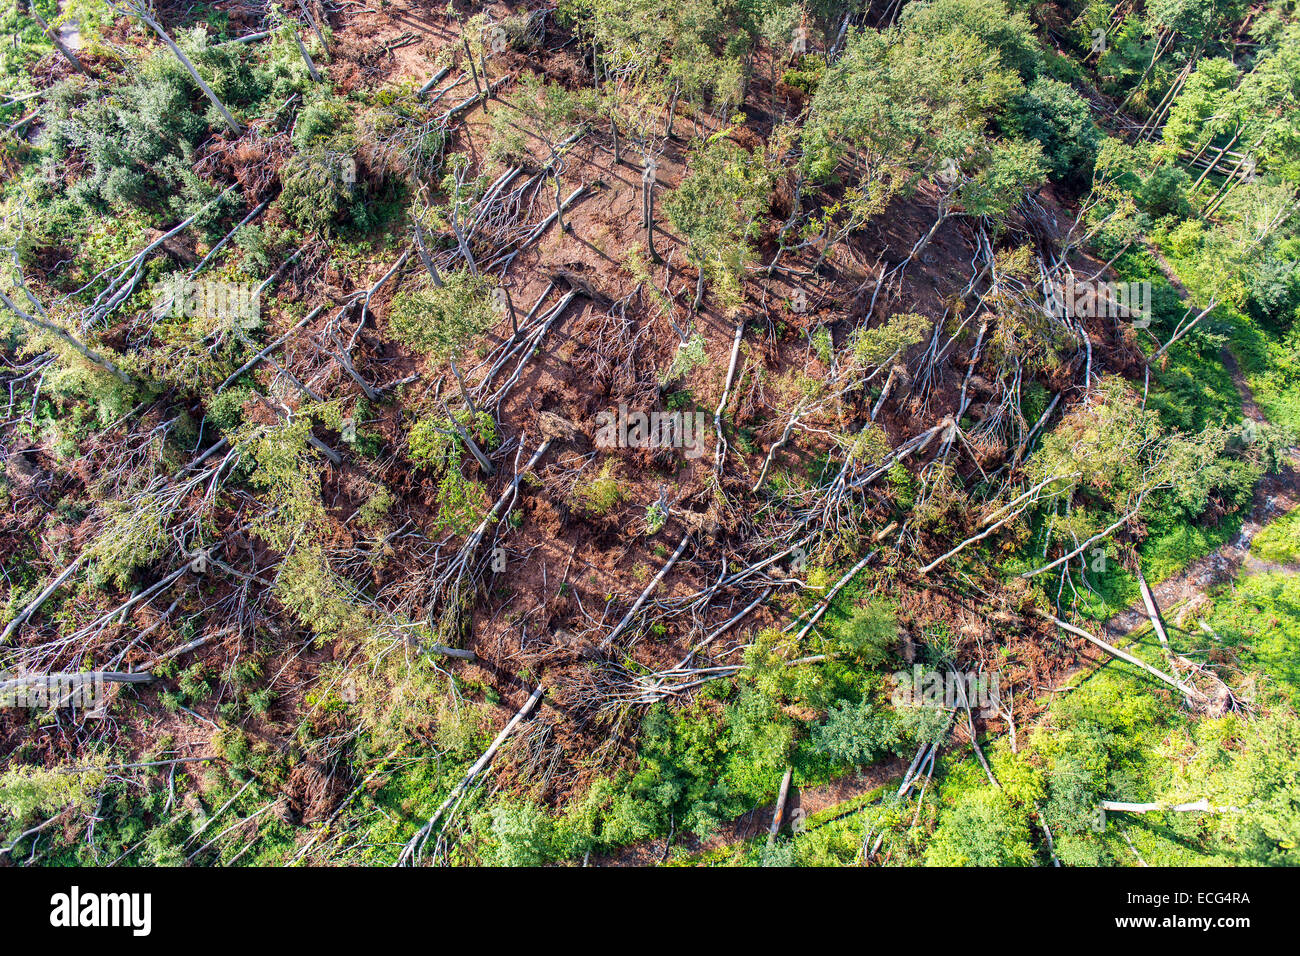 Storm damage in Schellenberger forest, above the Baldeneysee, caused by a heavy storm Ela, over the Rhine-Ruhr area, Stock Photo